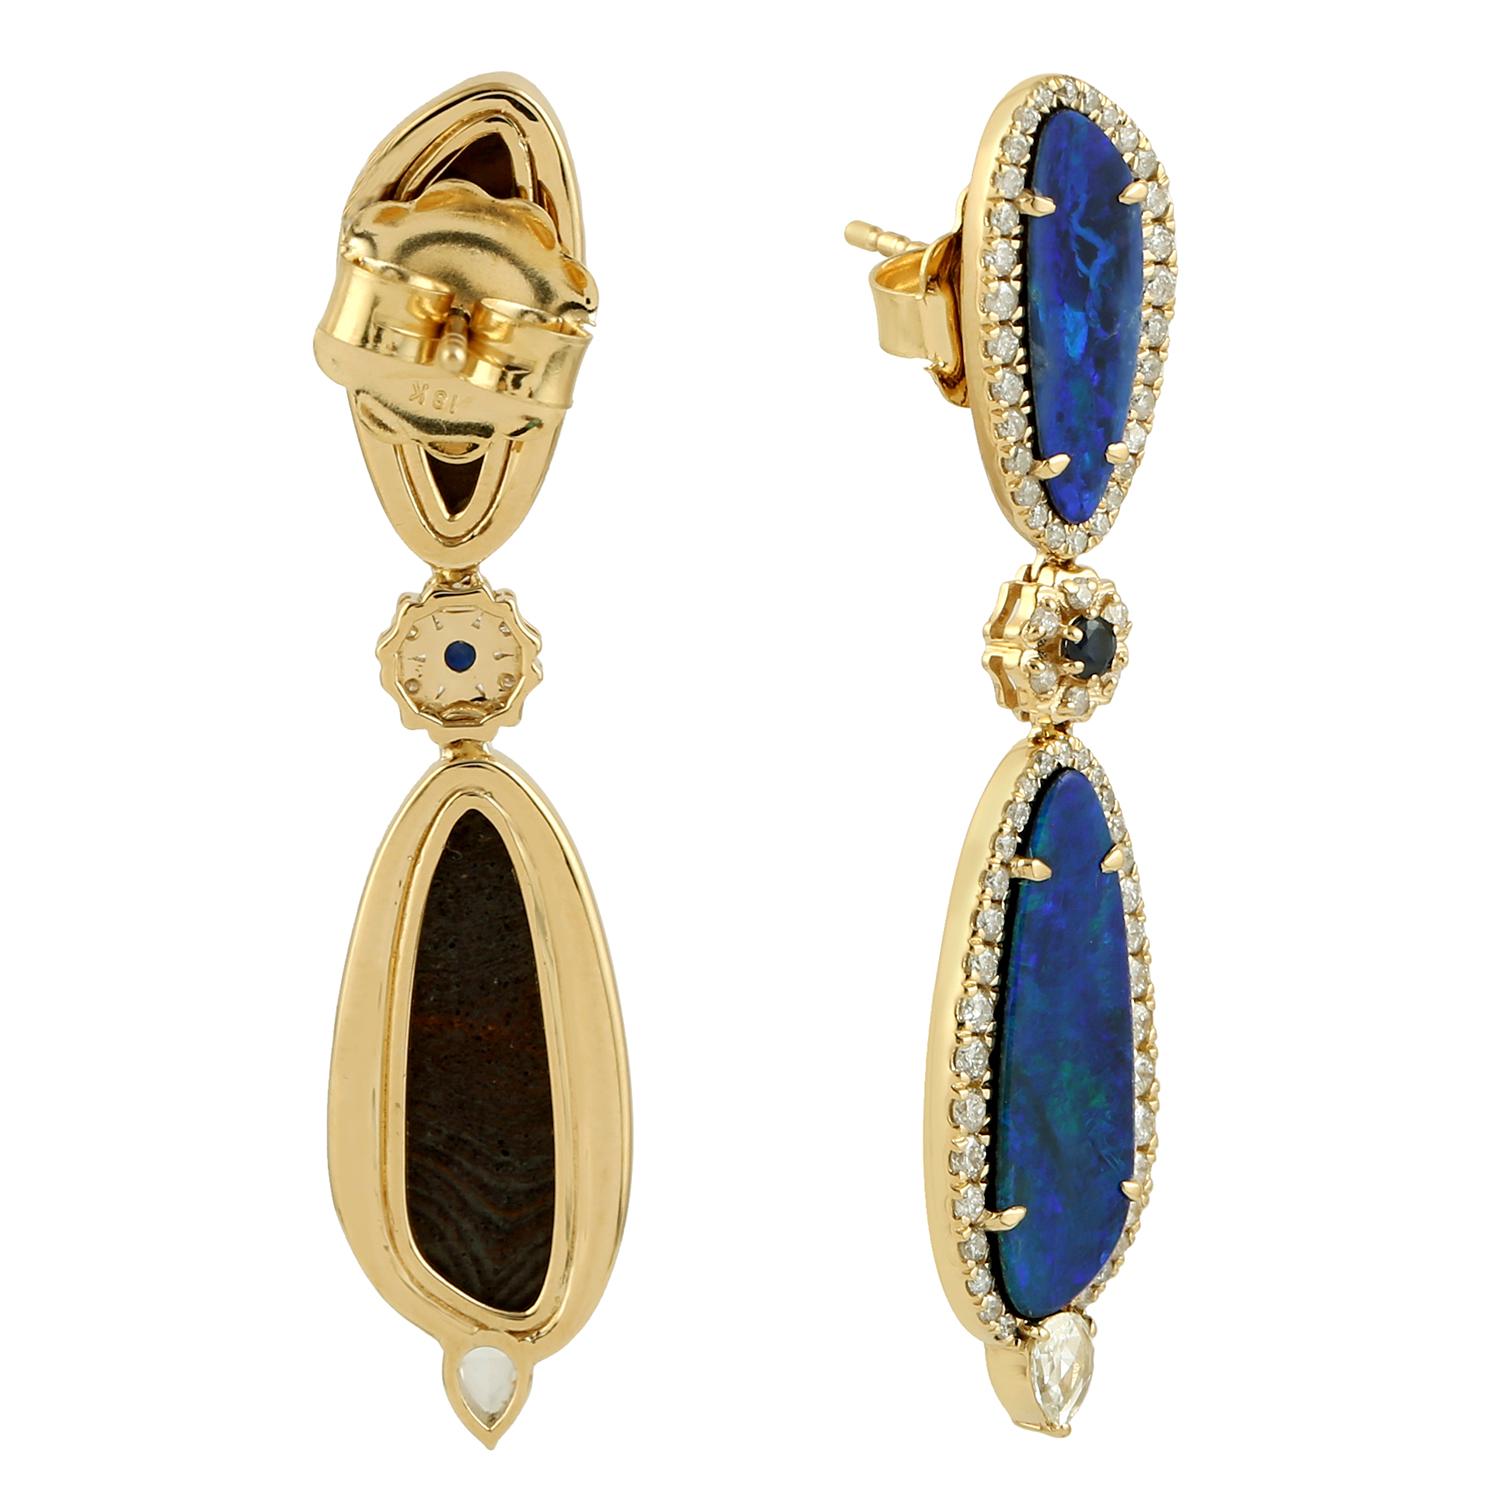 Contemporary 5.65 ct Opal Dangle Earrings With Sapphire & Diamonds Made In 18k Yellow Gold For Sale